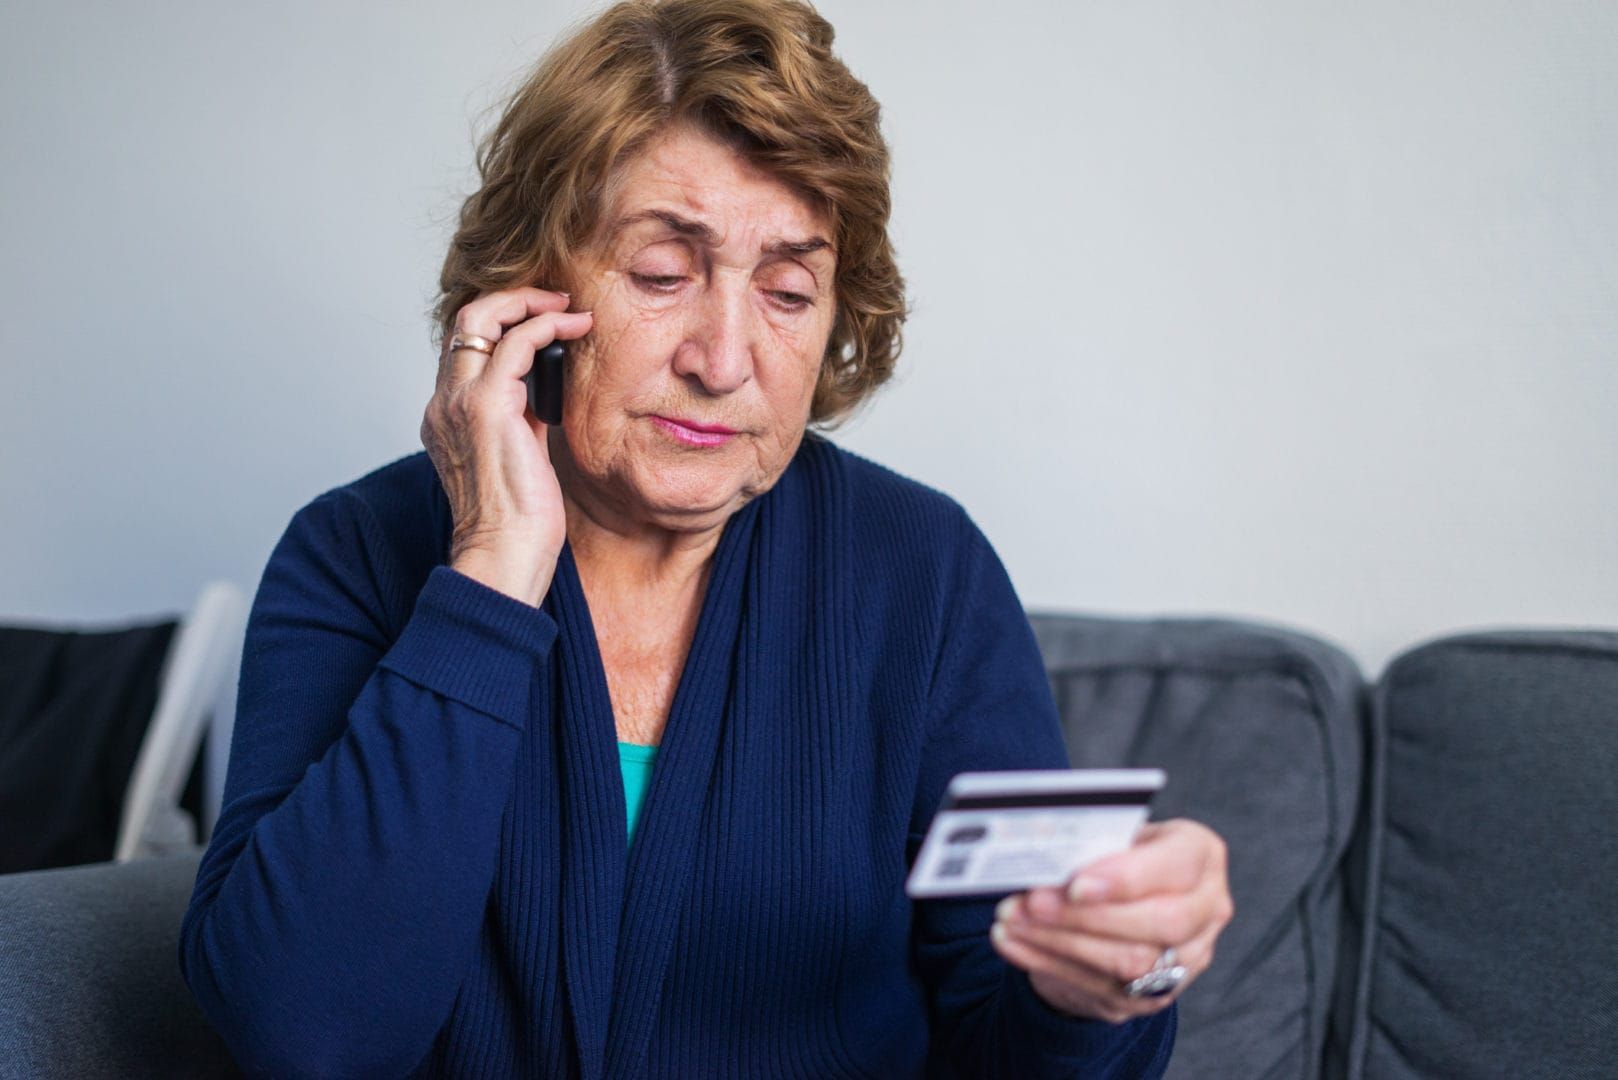 9 top financial scams targeting seniors and tips to avoid them